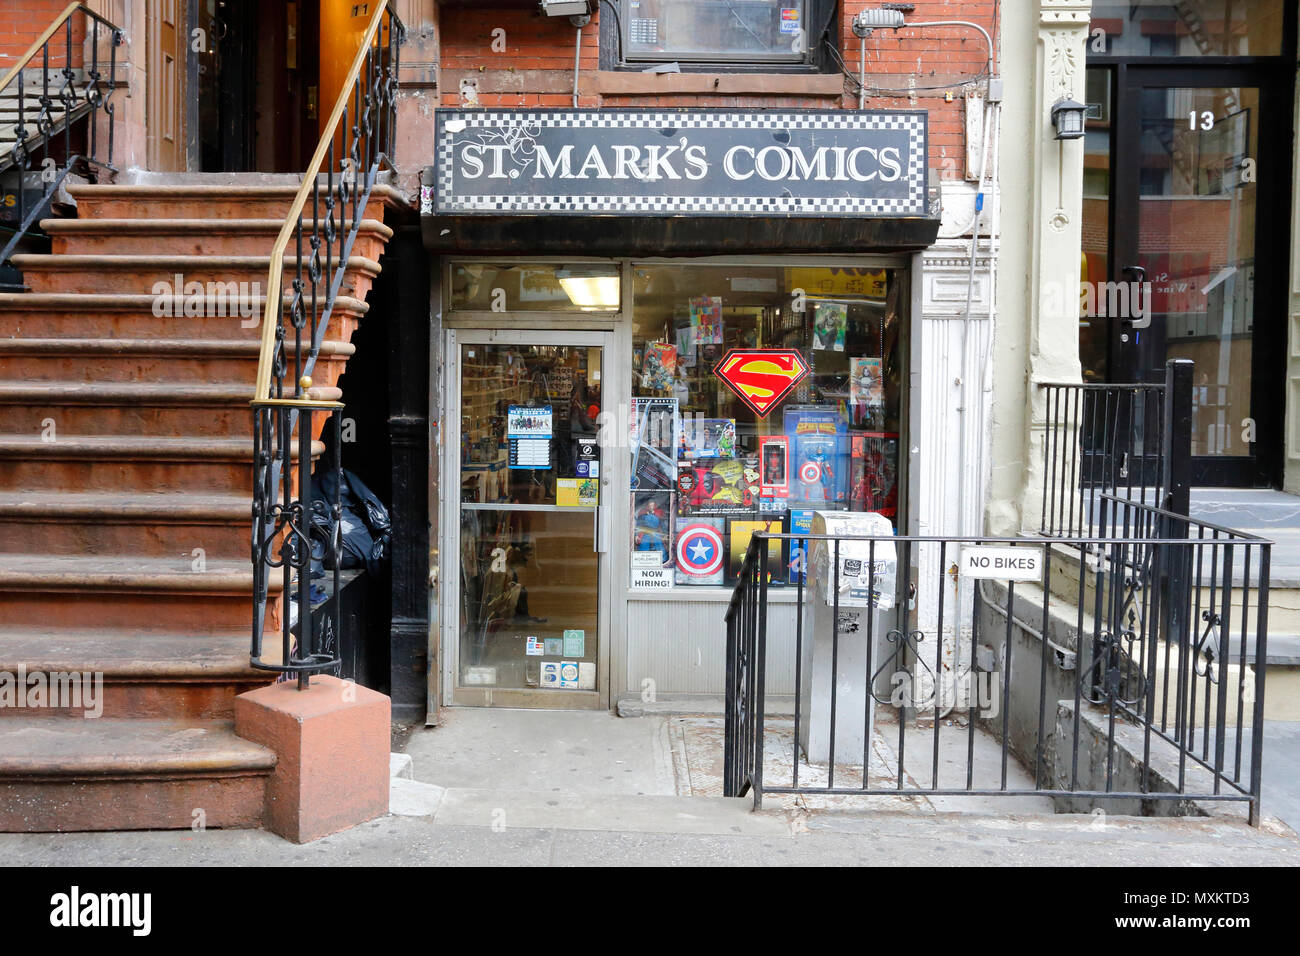 St. Mark's Comics, 11 St Marks Pl, New York, NY. exterior storefront of a comic book store in the East Village neighborhood of Manhattan. Stock Photo